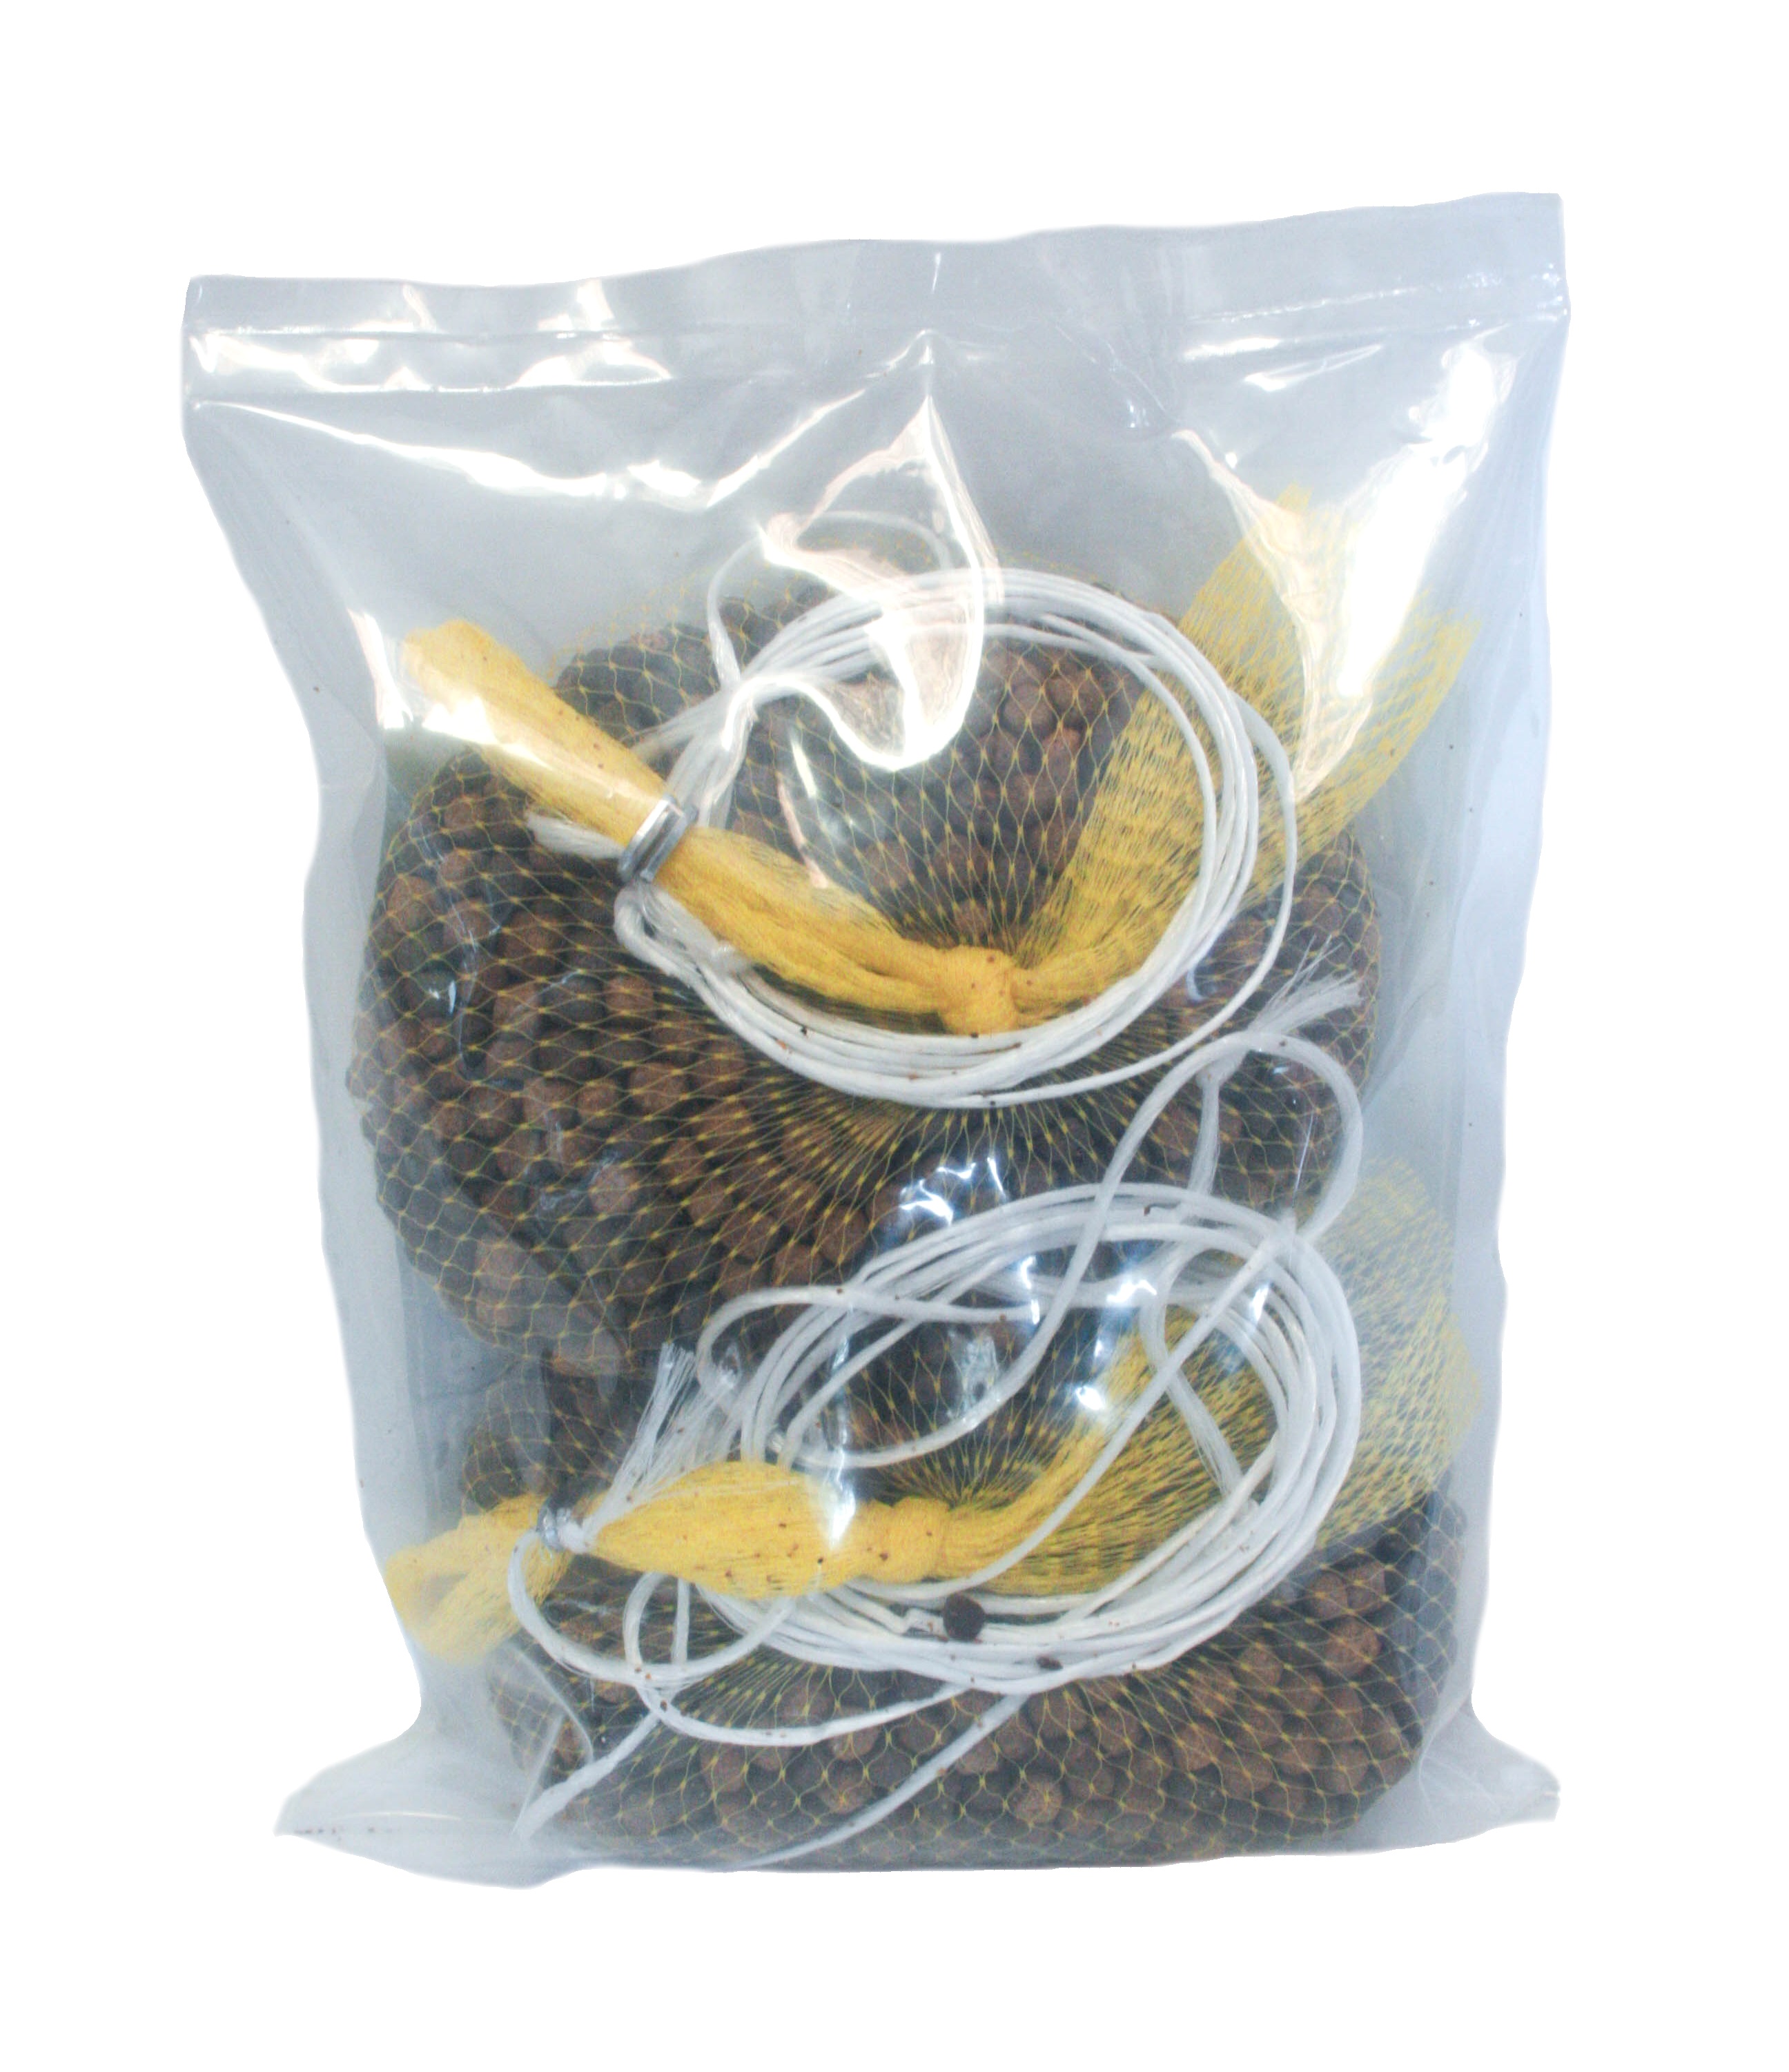 Mojo Fish Chum - Saltwater 2/1lb bags Effective Chum, Low Cost